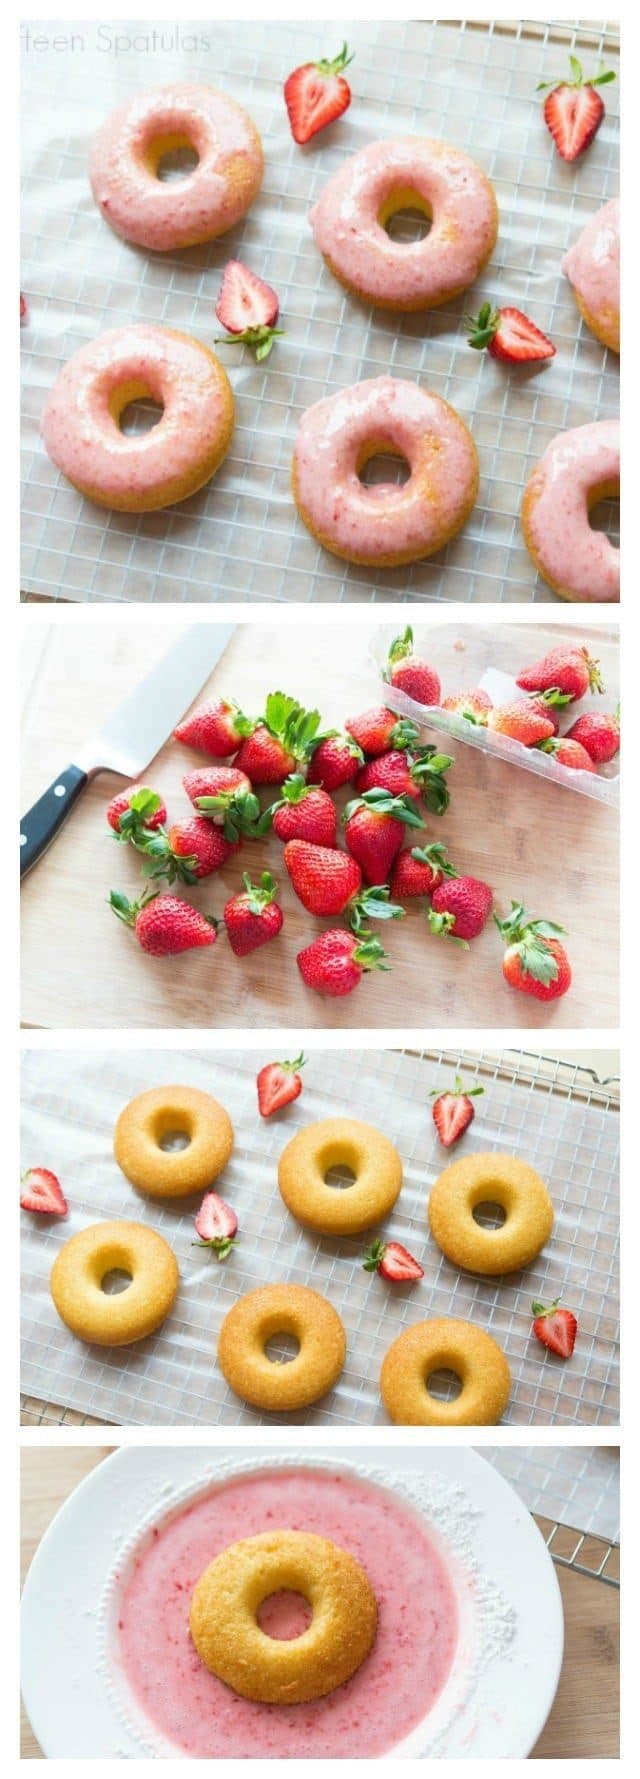 Photo Collage of How to Make Strawberry Donuts Using Fresh Berries and Glaze